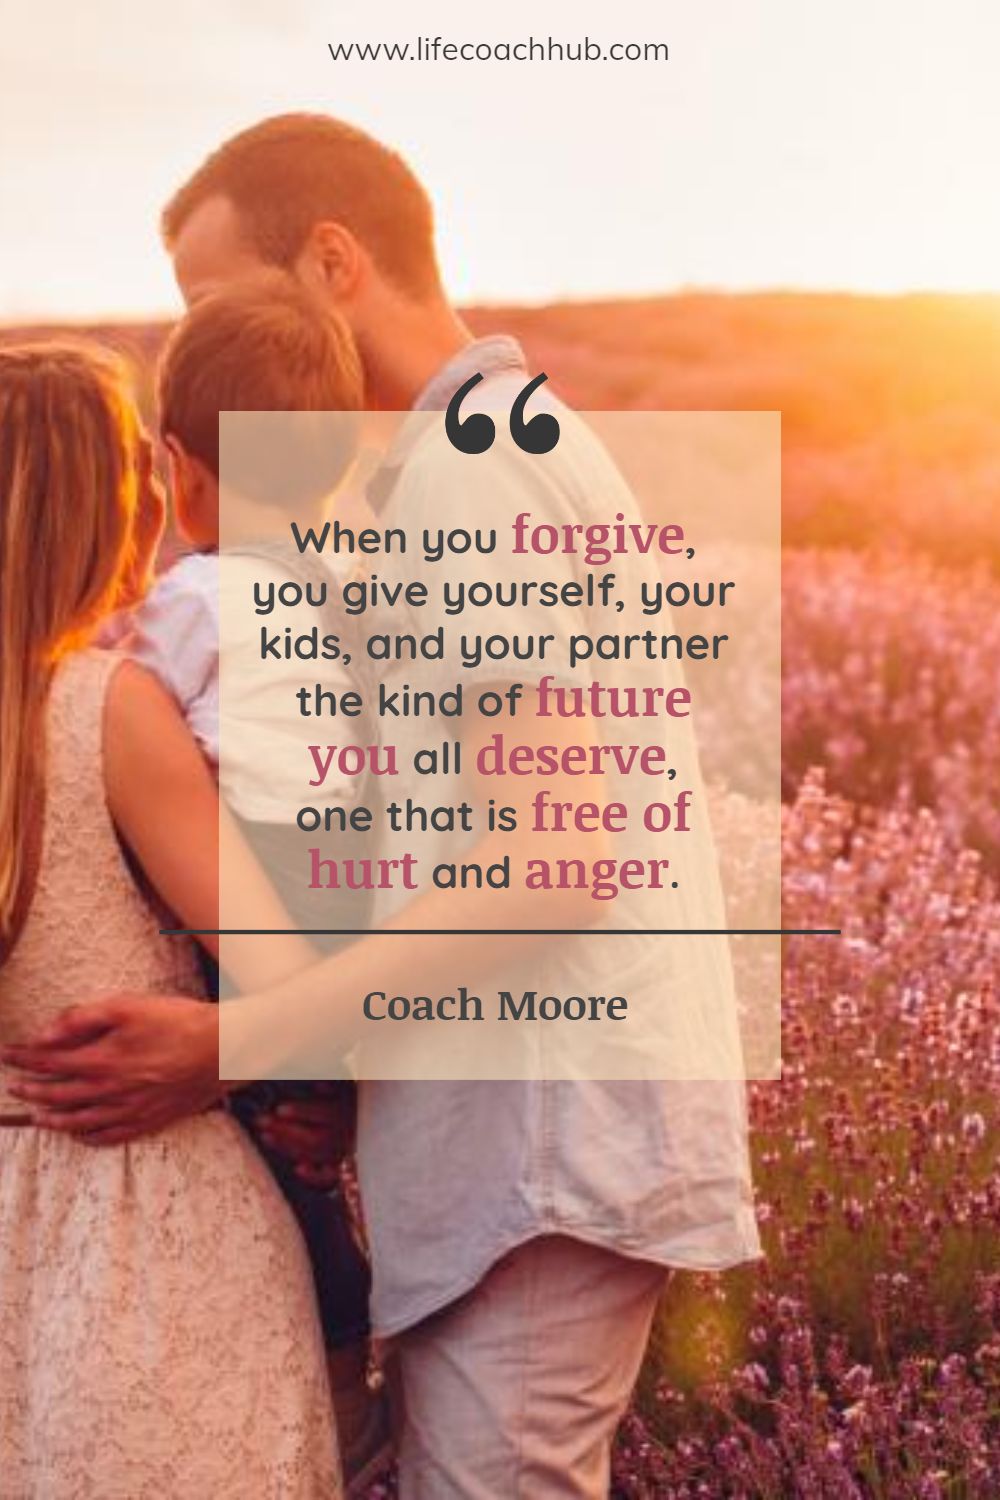 When you forgive, you give yourself, your kids, and your partner the kind of future you all deserve, one that is free of hurt and anger. Coach Moore Coaching Quote